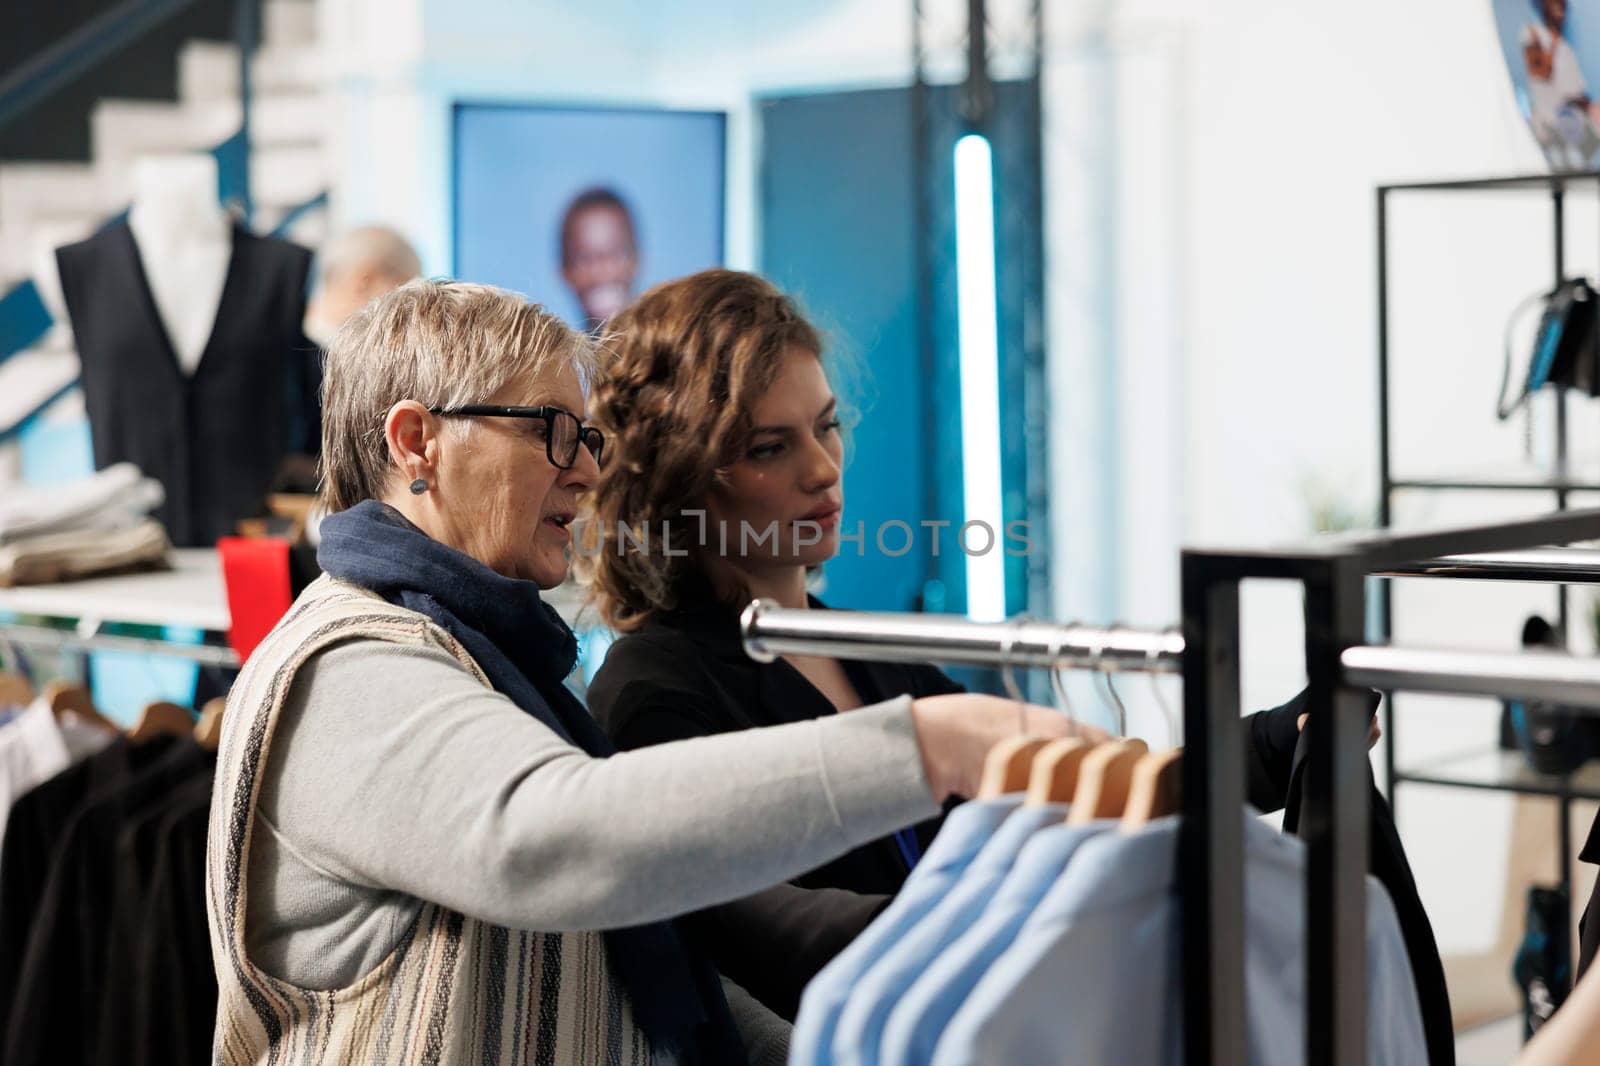 Showroom employee helping elderly woman choosing trendy clothes, discussing fabric in modern boutique. Senior client shopping for casual wear, buying fashionable merchandise in clothing store